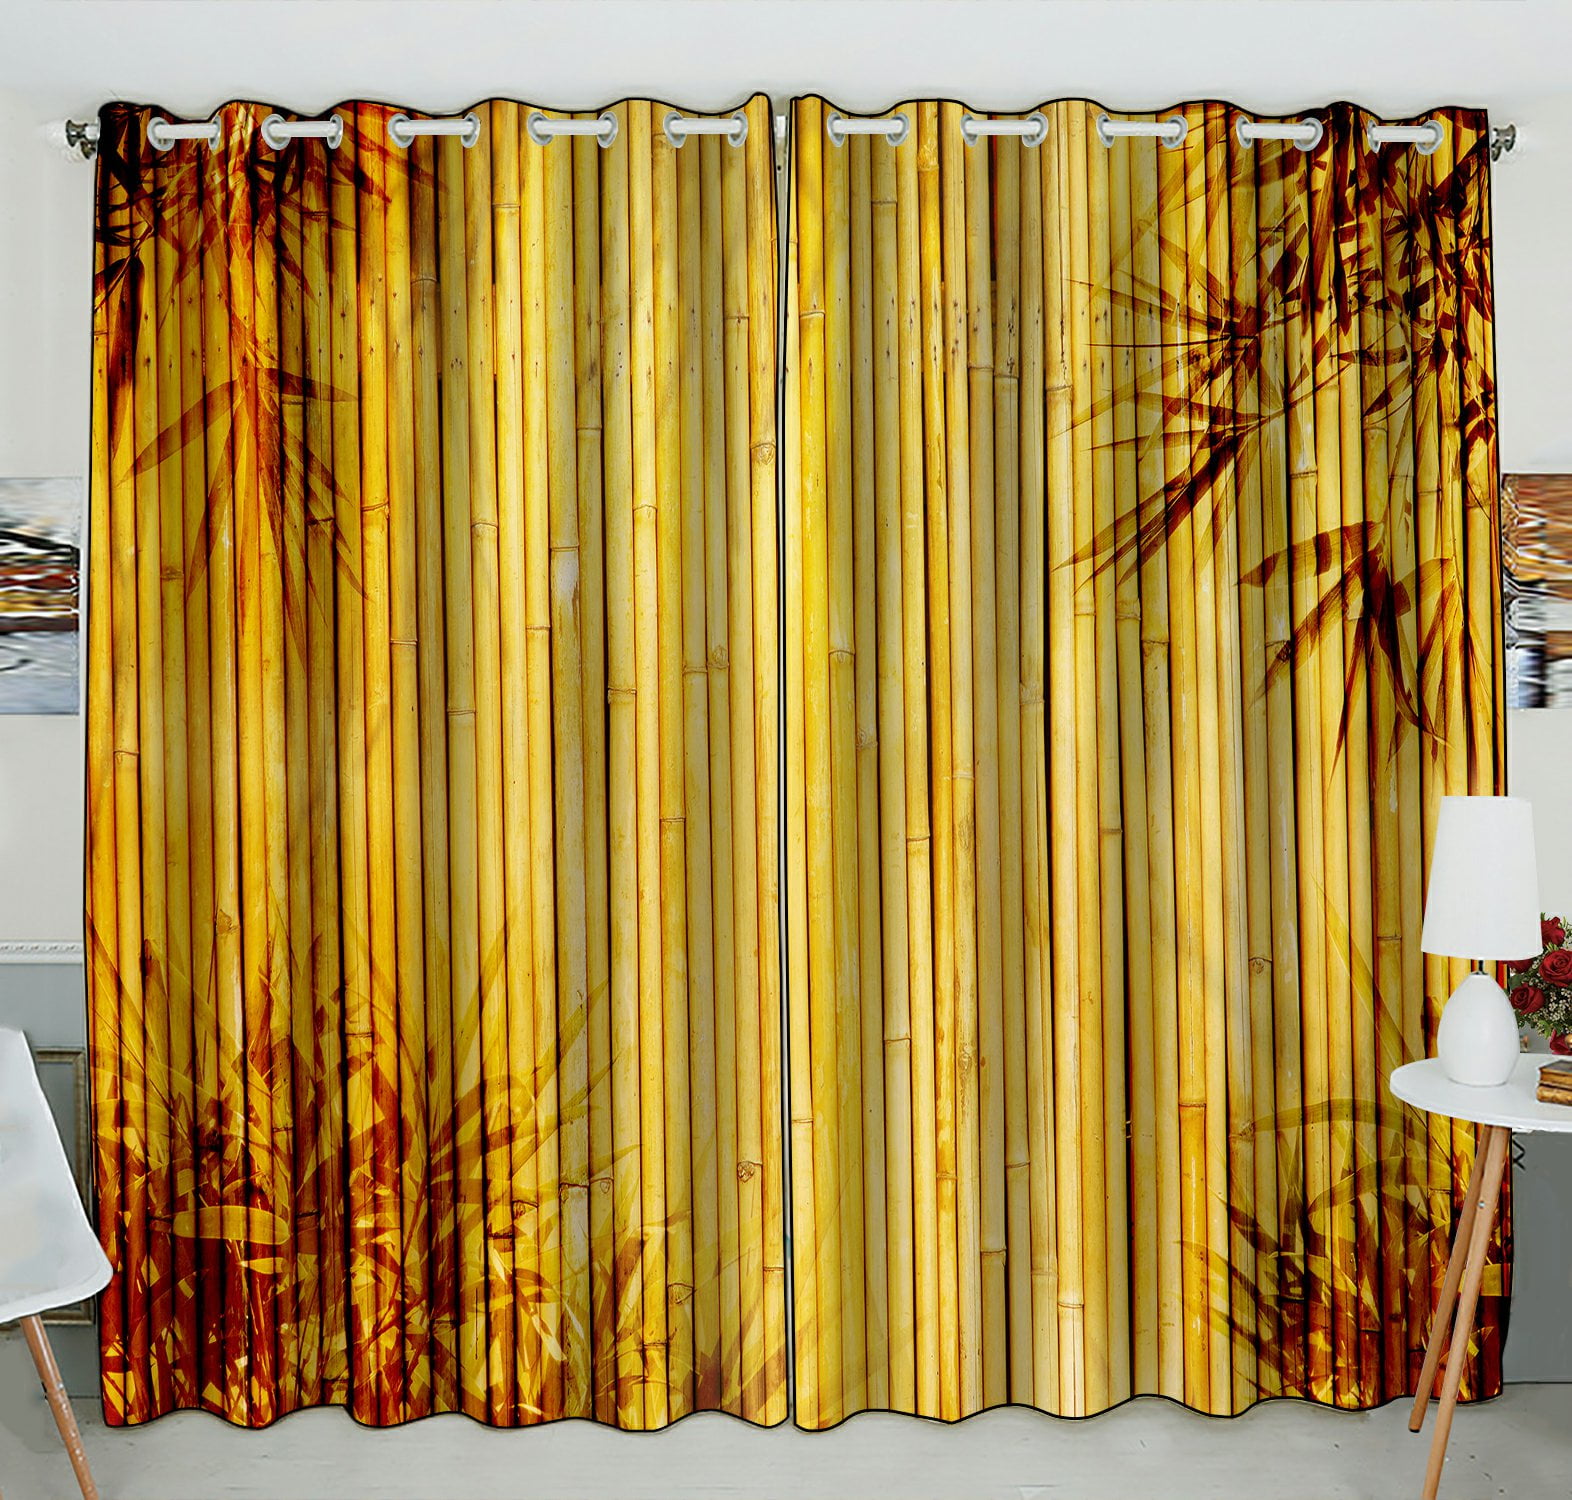 Phfzk Nature Wood Window Curtain, Bamboo And Leaves Window Curtain ...